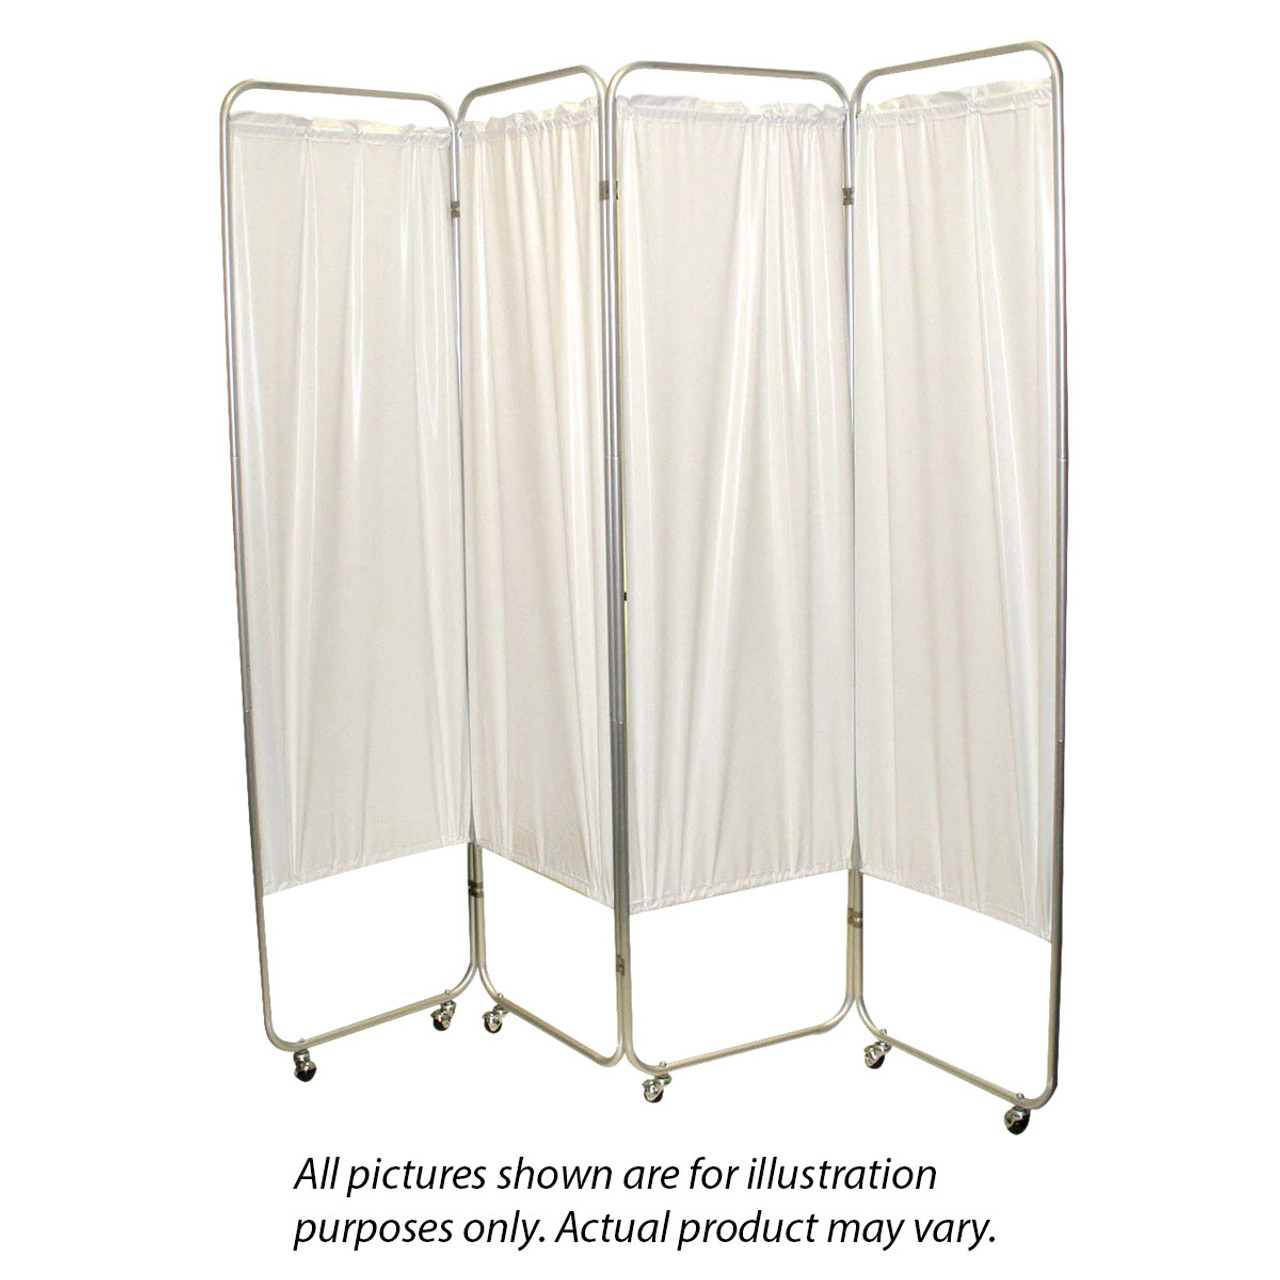 Standard 4-Panel Privacy Screen with casters - Yellow 4 mil vinyl, 62" W x 68" H extended, 19" W x 68" H x3.25" D folded